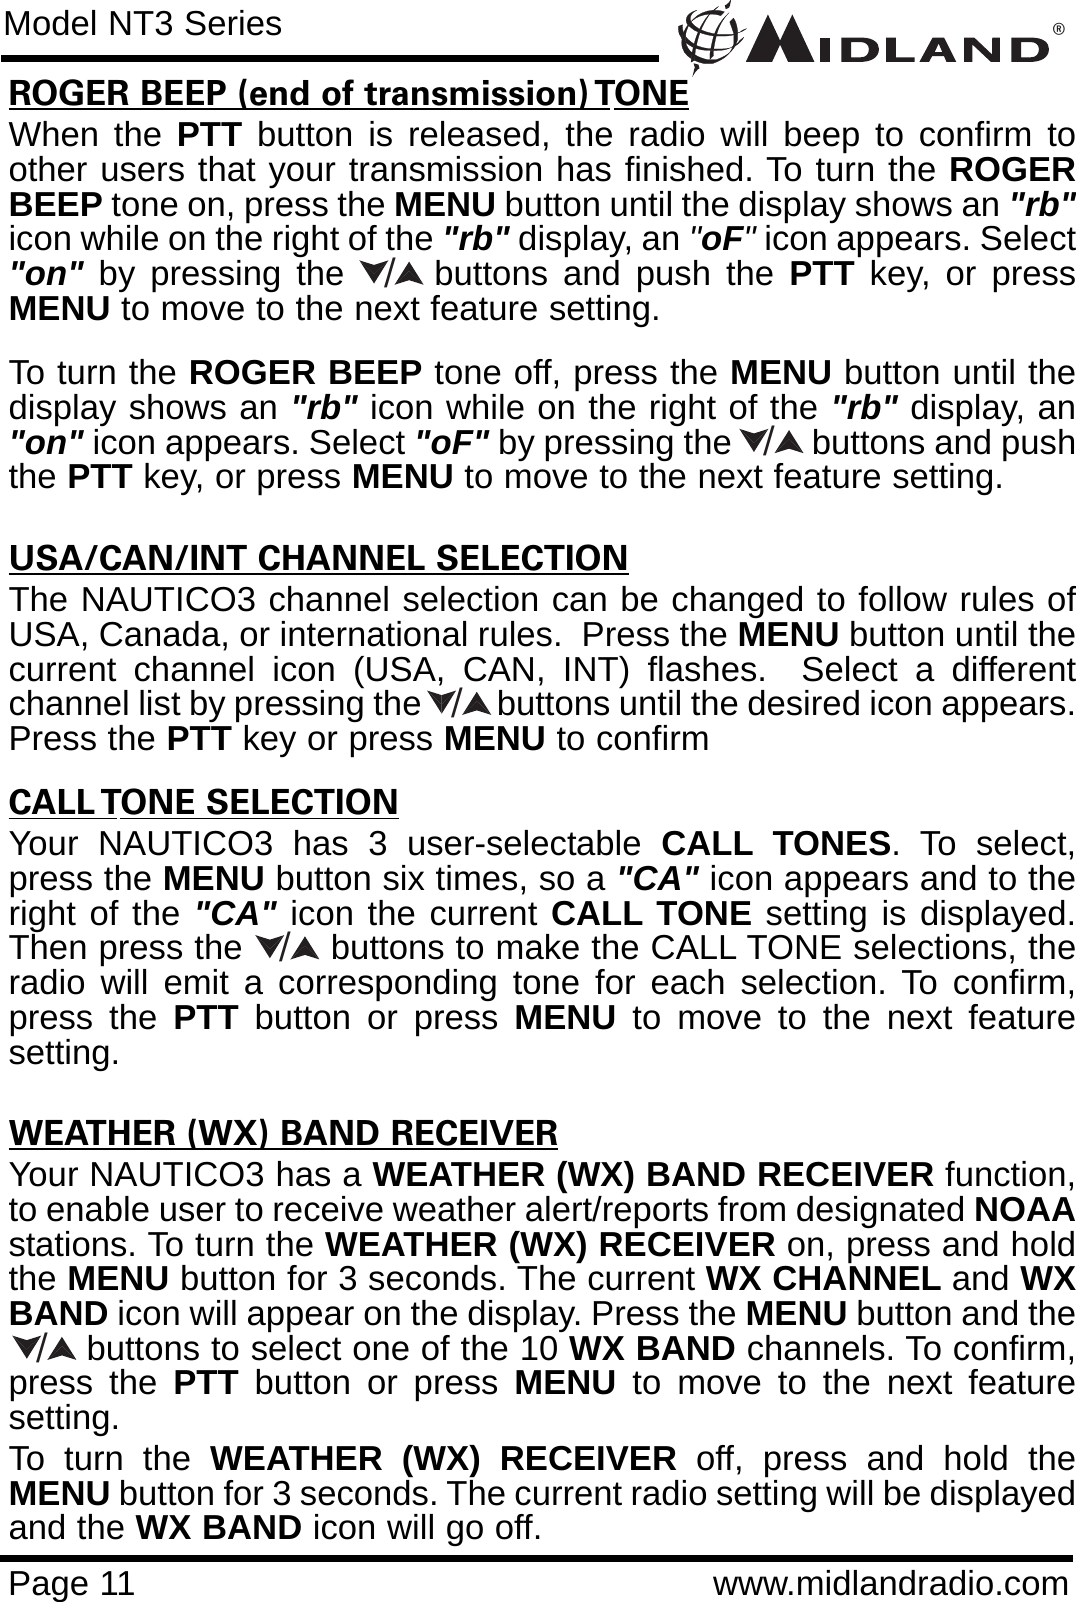 ®Page 11 www.midlandradio.comROGER BEEP (end of transmission) TONEWhen the PTT button is released, the radio will beep to confirm toother users that your transmission has finished. To turn the ROGERBEEP tone on, press the MENU button until the display shows an &quot;rb&quot;icon while on the right of the &quot;rb&quot; display, an &quot;oF&quot;icon appears. Select&quot;on&quot; by pressing the      buttons and push the PTT key, or pressMENU to move to the next feature setting.To turn the ROGER BEEP tone off, press the MENU button until thedisplay shows an &quot;rb&quot; icon while on the right of the &quot;rb&quot; display, an&quot;on&quot; icon appears. Select &quot;oF&quot; by pressing the         buttons and pushthe PTT key, or press MENU to move to the next feature setting.USA/CAN/INT CHANNEL SELECTIONThe NAUTICO3 channel selection can be changed to follow rules ofUSA, Canada, or international rules.  Press the MENU button until thecurrent channel icon (USA, CAN, INT) flashes.  Select a differentchannel list by pressing the         buttons until the desired icon appears.Press the PTT key or press MENU to confirmCALL TONE SELECTIONYour NAUTICO3 has 3 user-selectable CALL TONES. To select,press the MENU button six times, so a &quot;CA&quot; icon appears and to theright of the &quot;CA&quot; icon the current CALL TONE setting is displayed.Then press the        buttons to make the CALL TONE selections, theradio will emit a corresponding tone for each selection. To confirm,press the PTT button or press MENU to move to the next featuresetting.WEATHER (WX) BAND RECEIVERYour NAUTICO3 has a WEATHER (WX) BAND RECEIVER function,to enable user to receive weather alert/reports from designated NOAAstations. To turn the WEATHER (WX) RECEIVER on, press and holdthe MENU button for 3 seconds. The current WX CHANNEL and WXBAND icon will appear on the display. Press the MENU button and thebuttons to select one of the 10 WX BAND channels. To confirm,press the PTT button or press MENU to move to the next featuresetting. To turn the WEATHER (WX) RECEIVER off, press and hold theMENU button for 3 seconds. The current radio setting will be displayedand the WX BAND icon will go off.Model NT3 Series/////